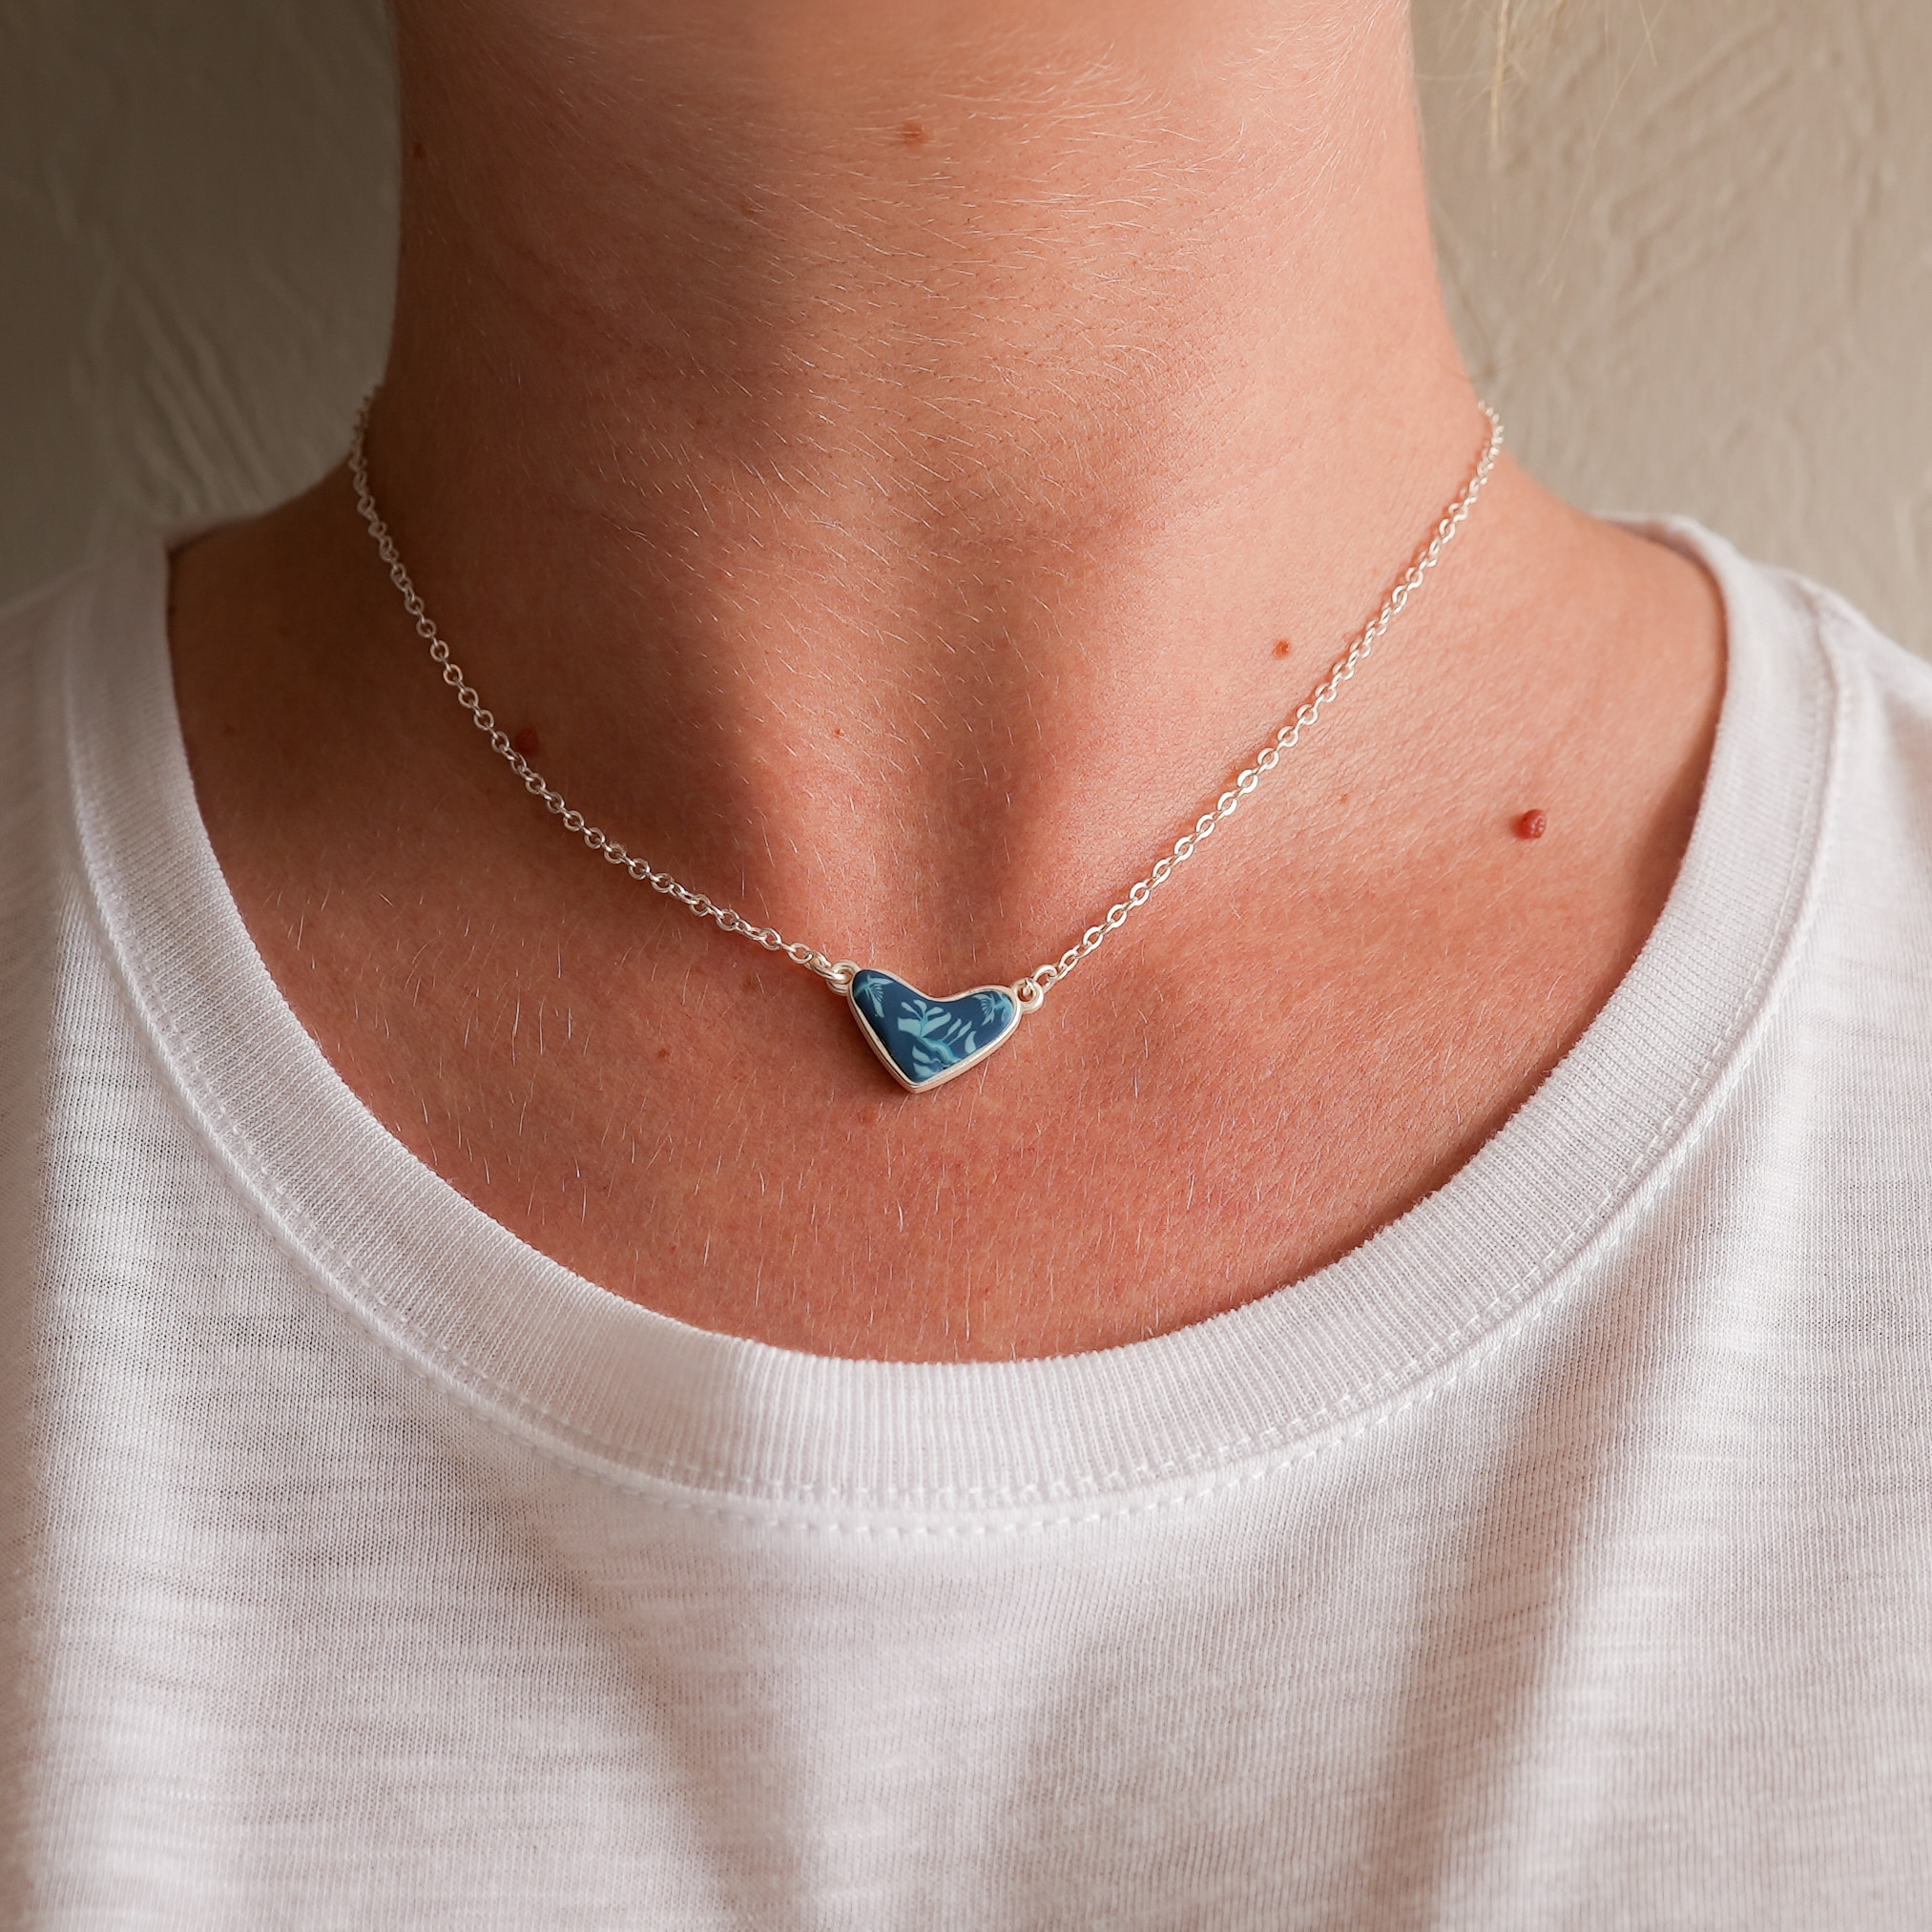 People We Love Necklace: Friend image